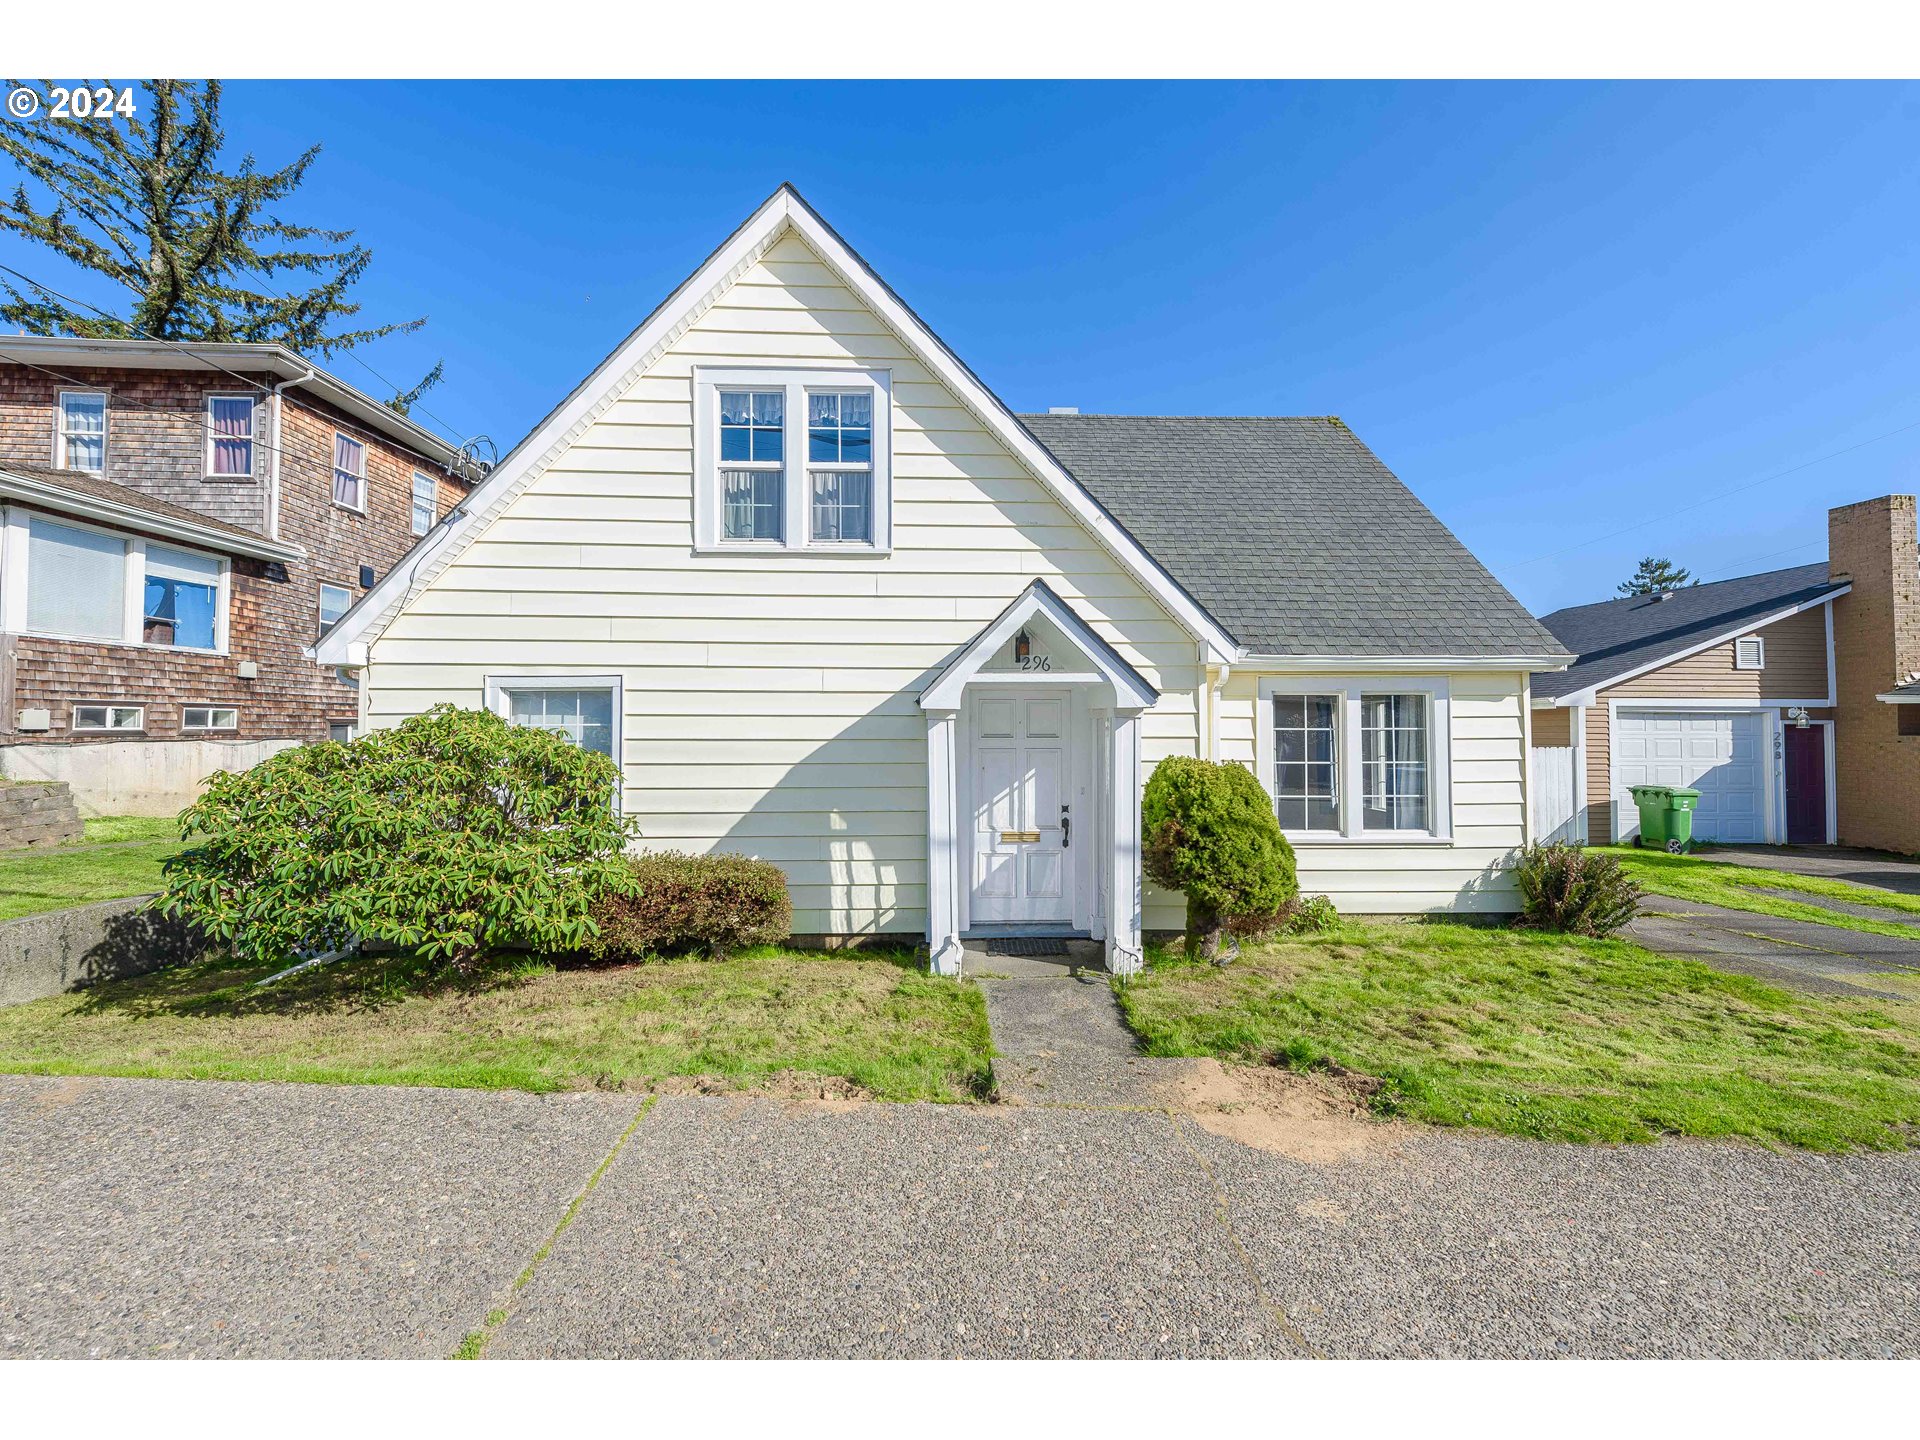 296 S 10TH ST, Coos Bay, OR 